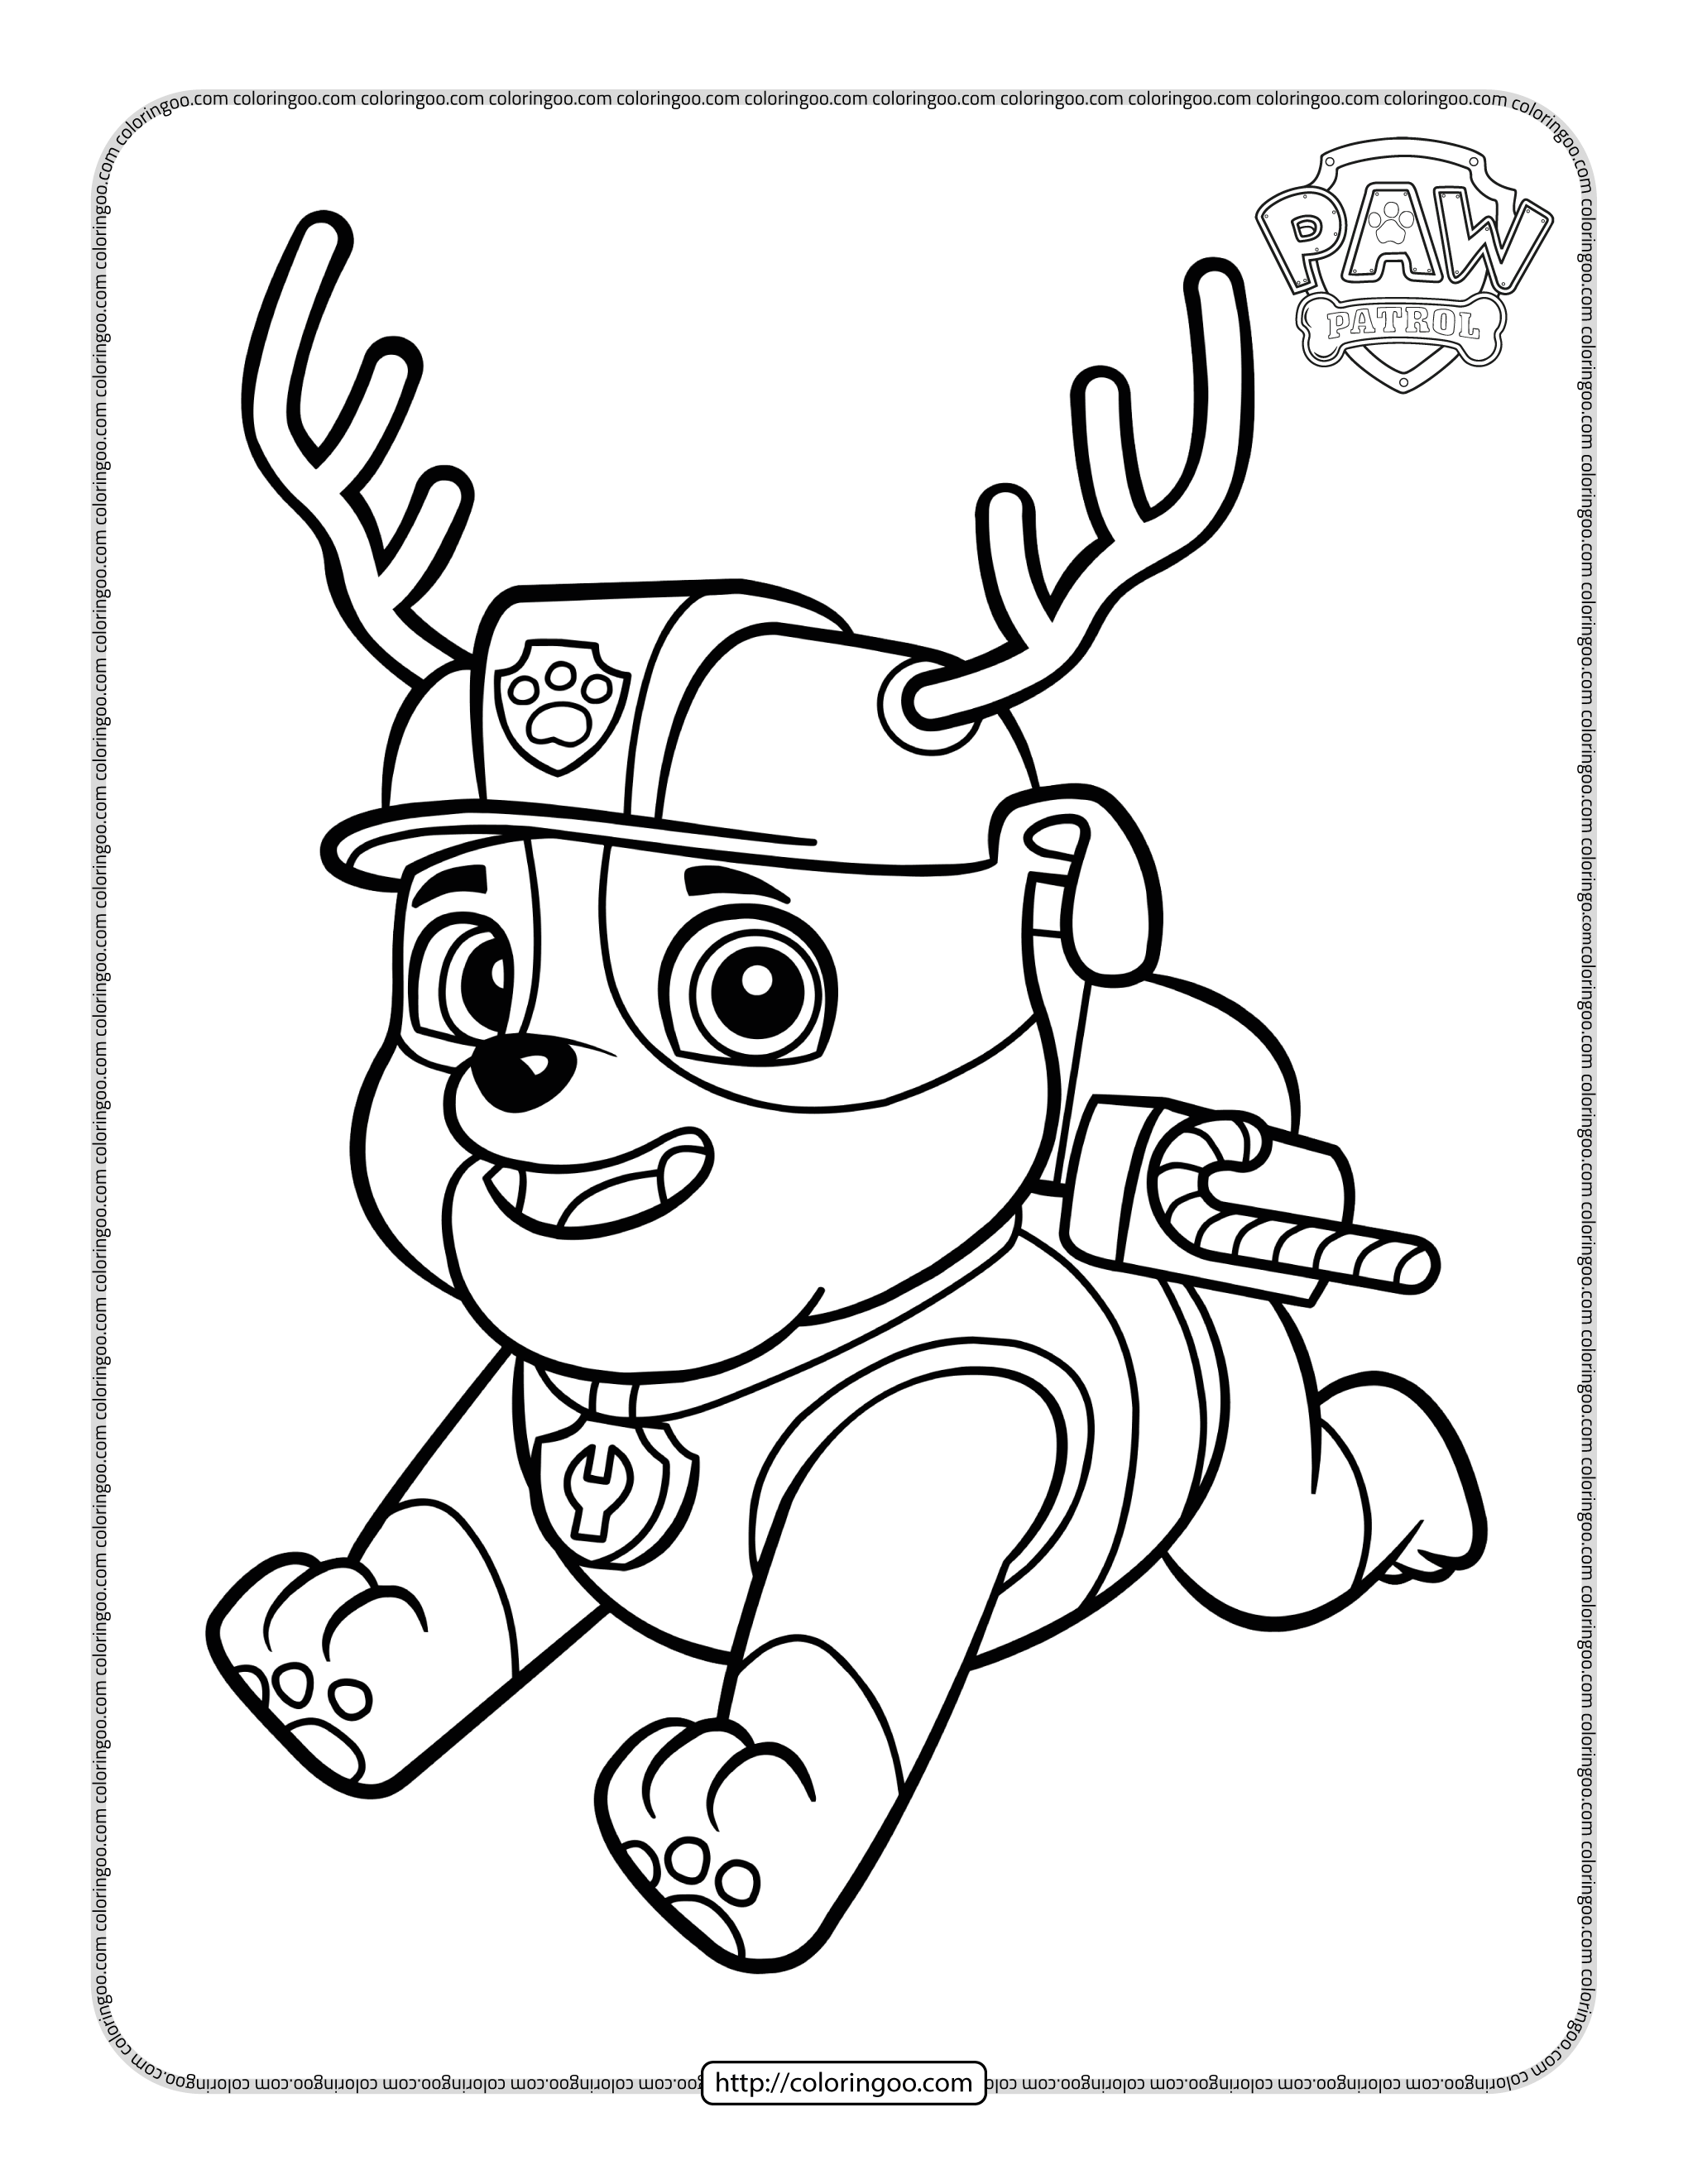 rubble with reindeer antlers coloring page